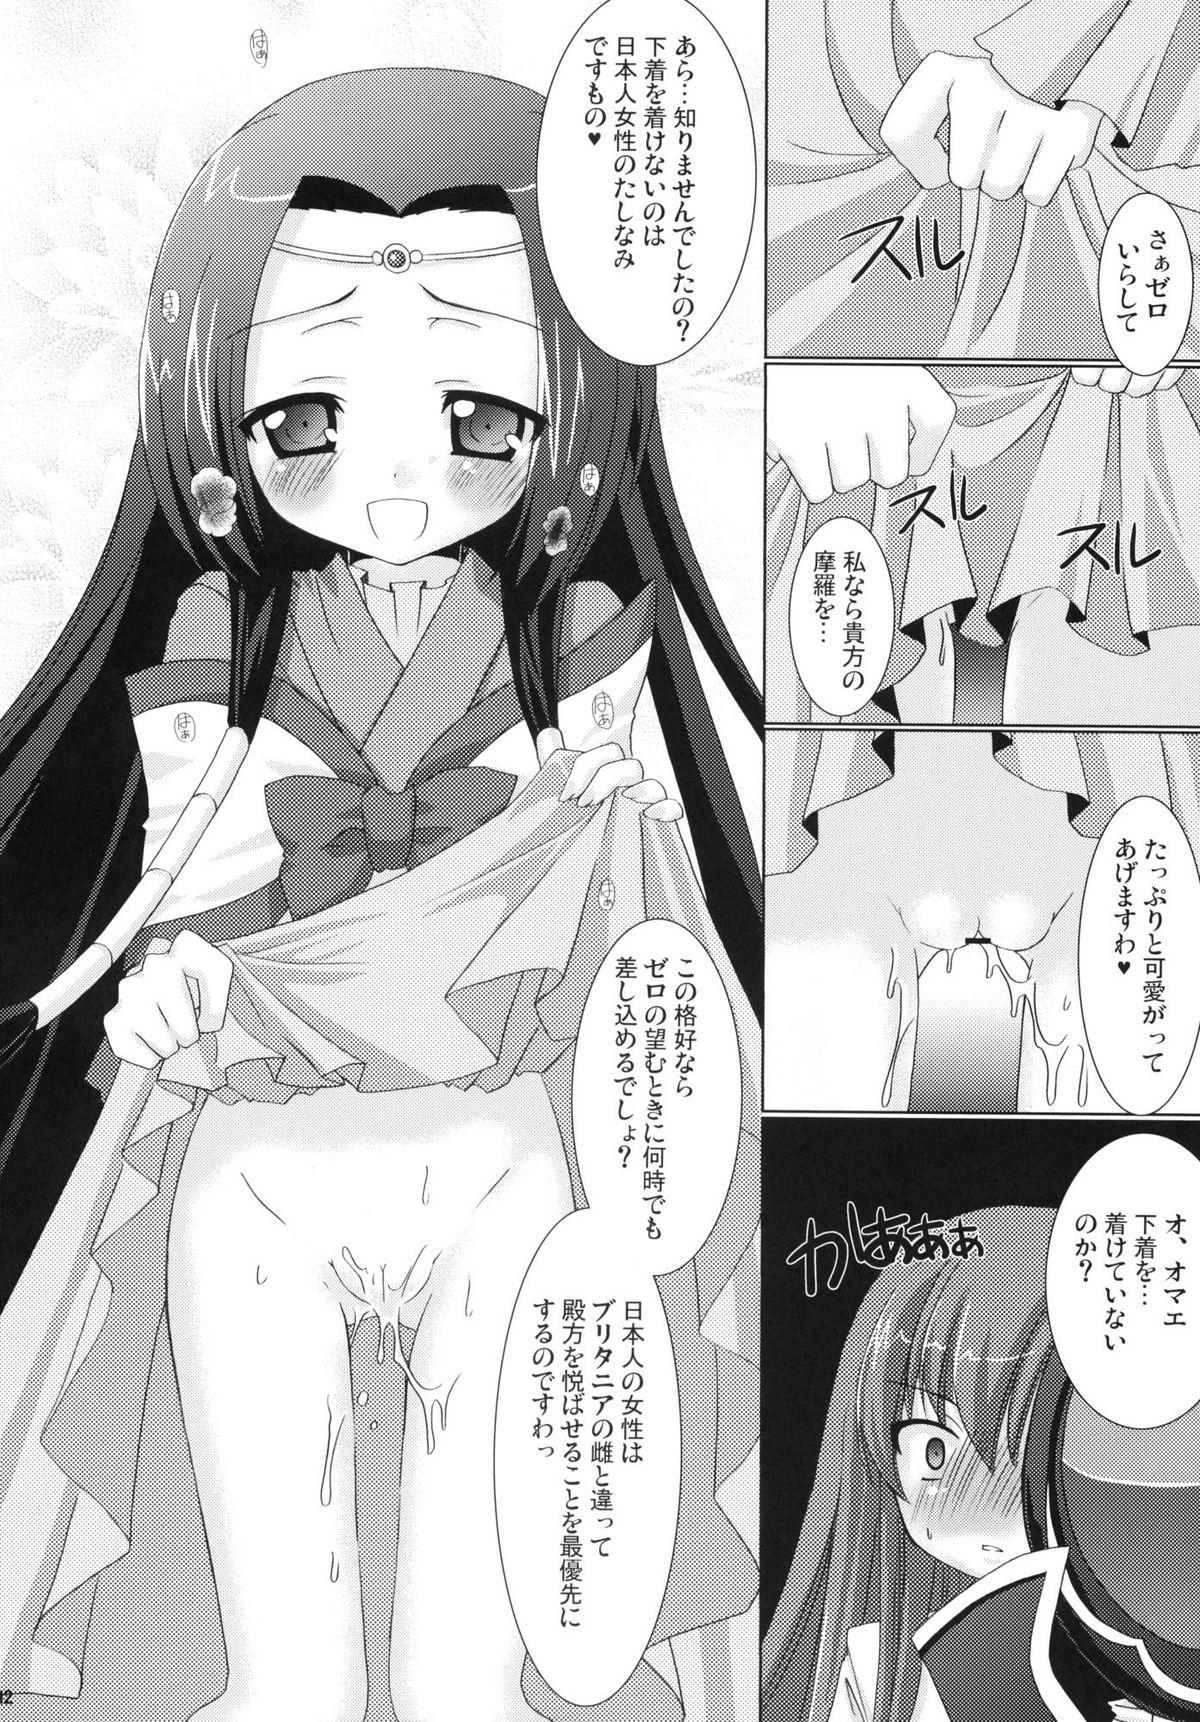 Boy Girl Kouhime Kyouhime - Code geass Compilation - Page 12